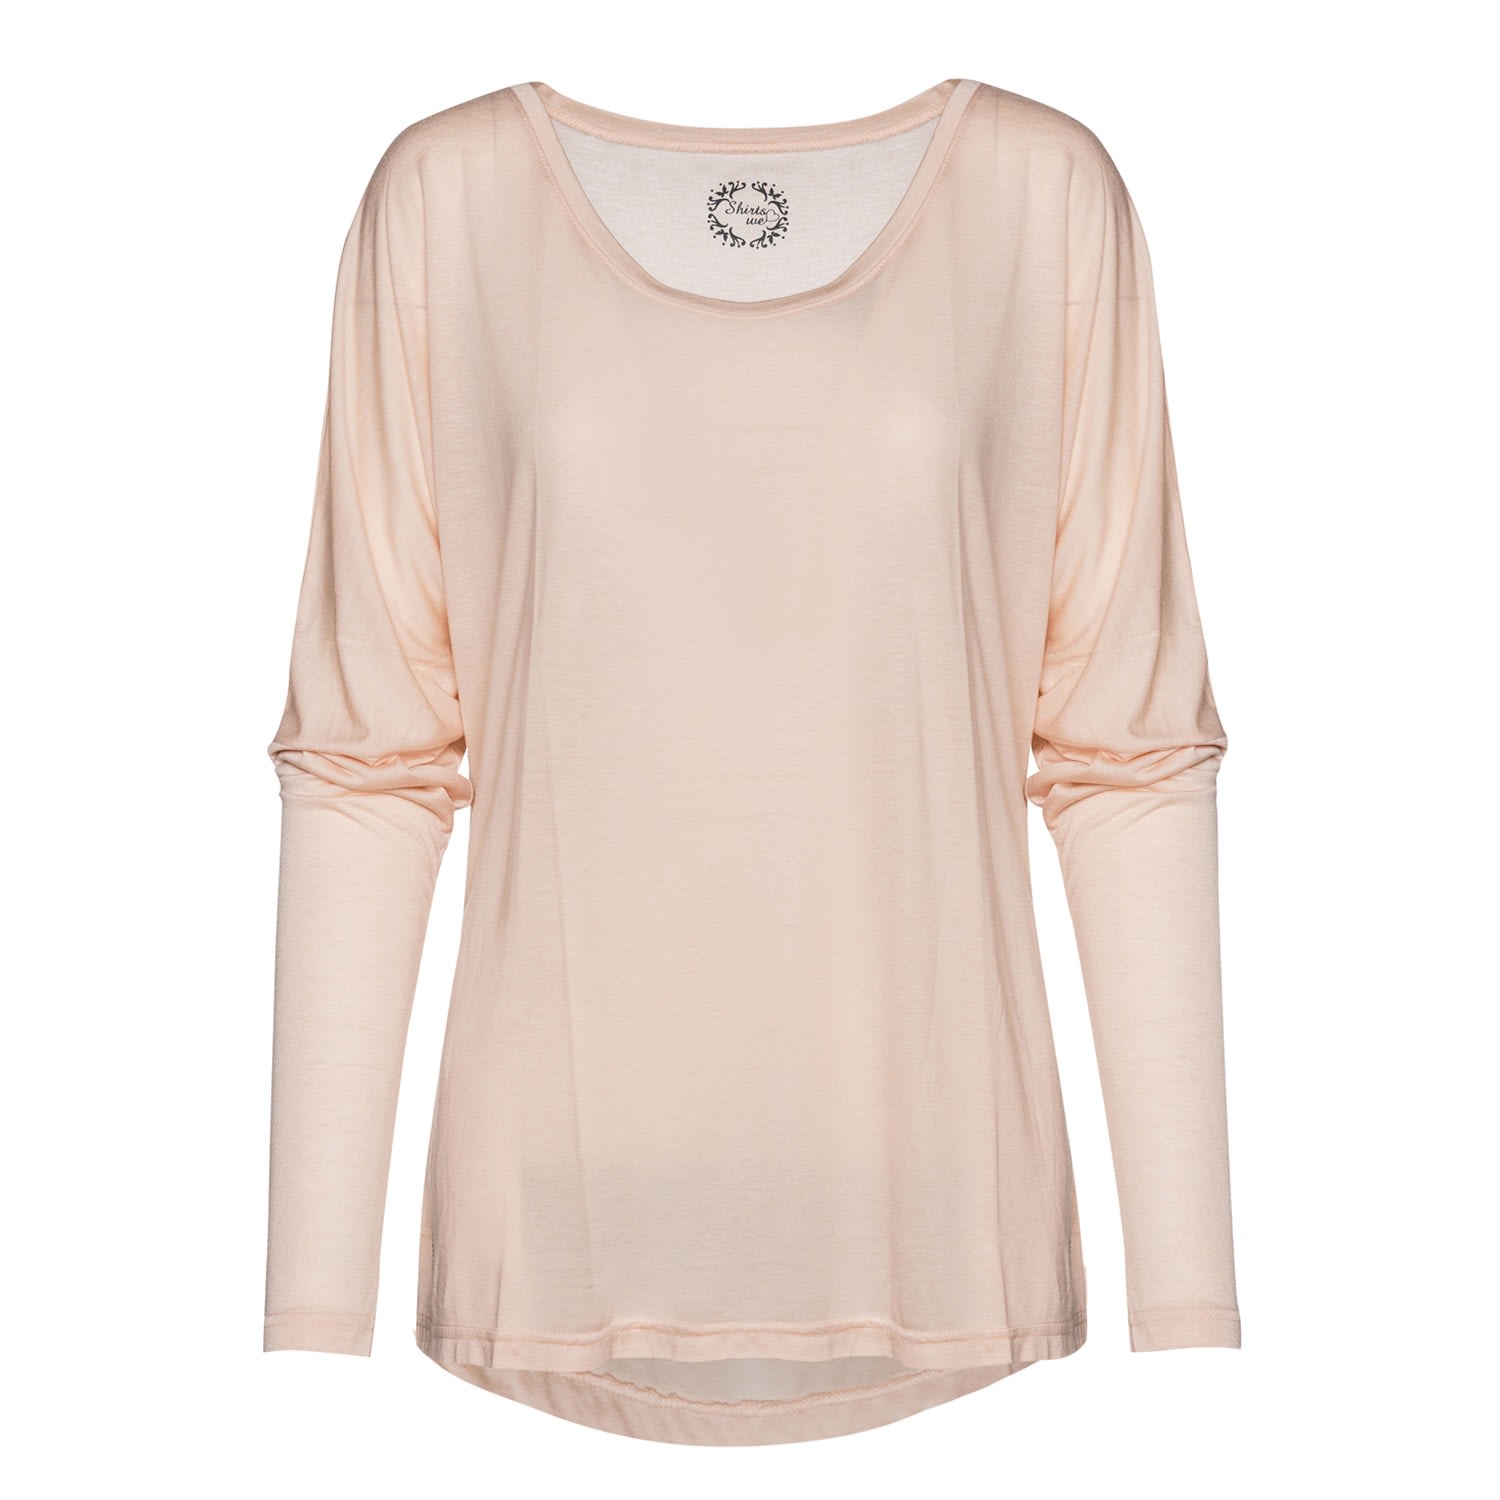 Women’s Rose Gold Light Pink Top With Batwing Sleeves Medium Conquista